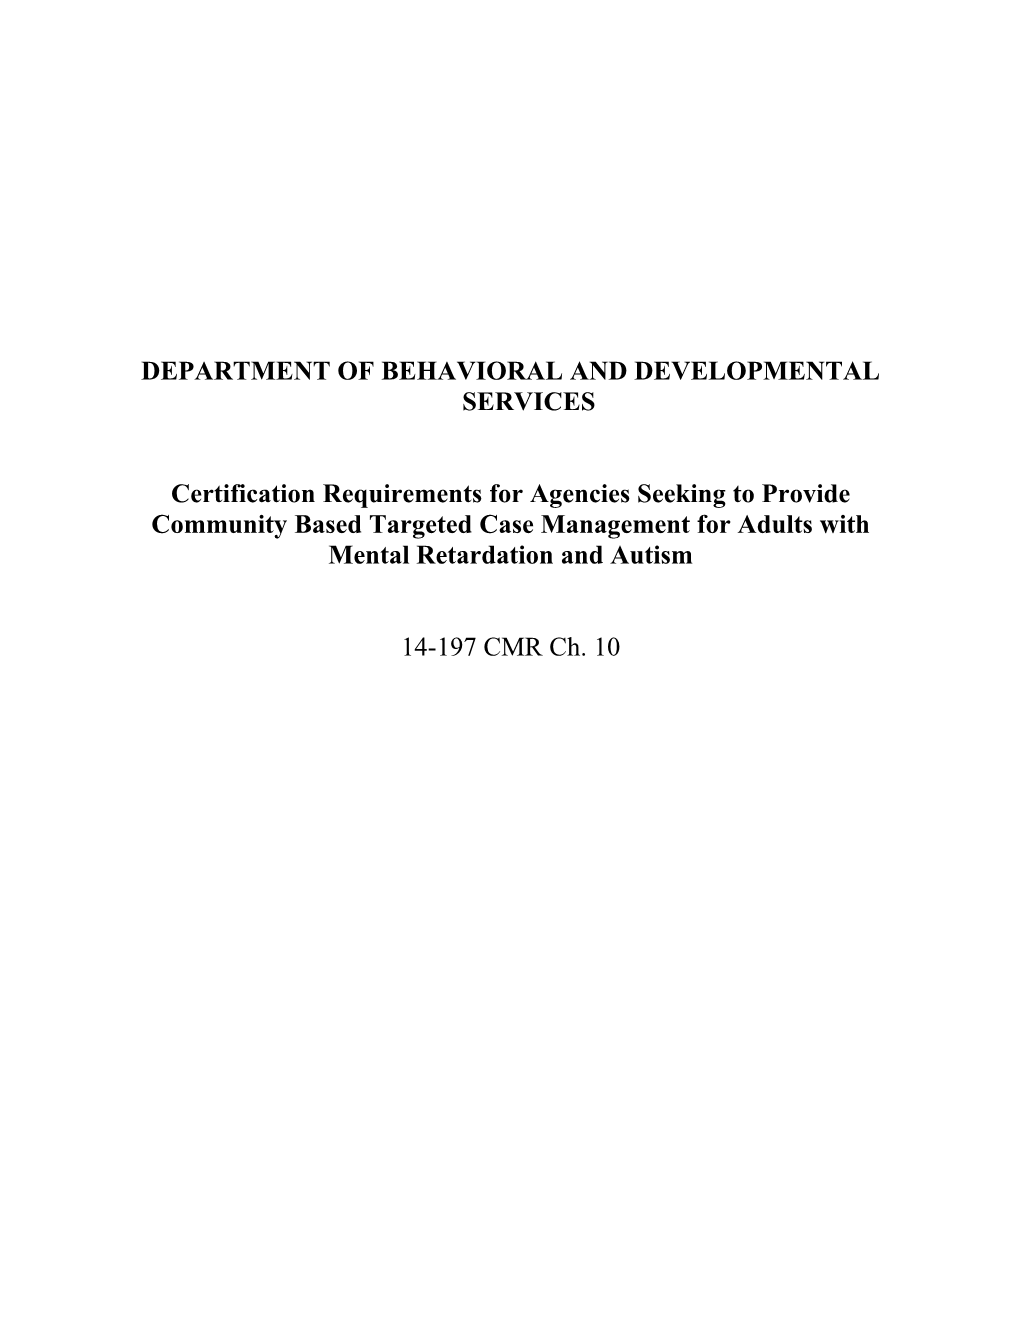 Department of Behavioral and Developmental Services